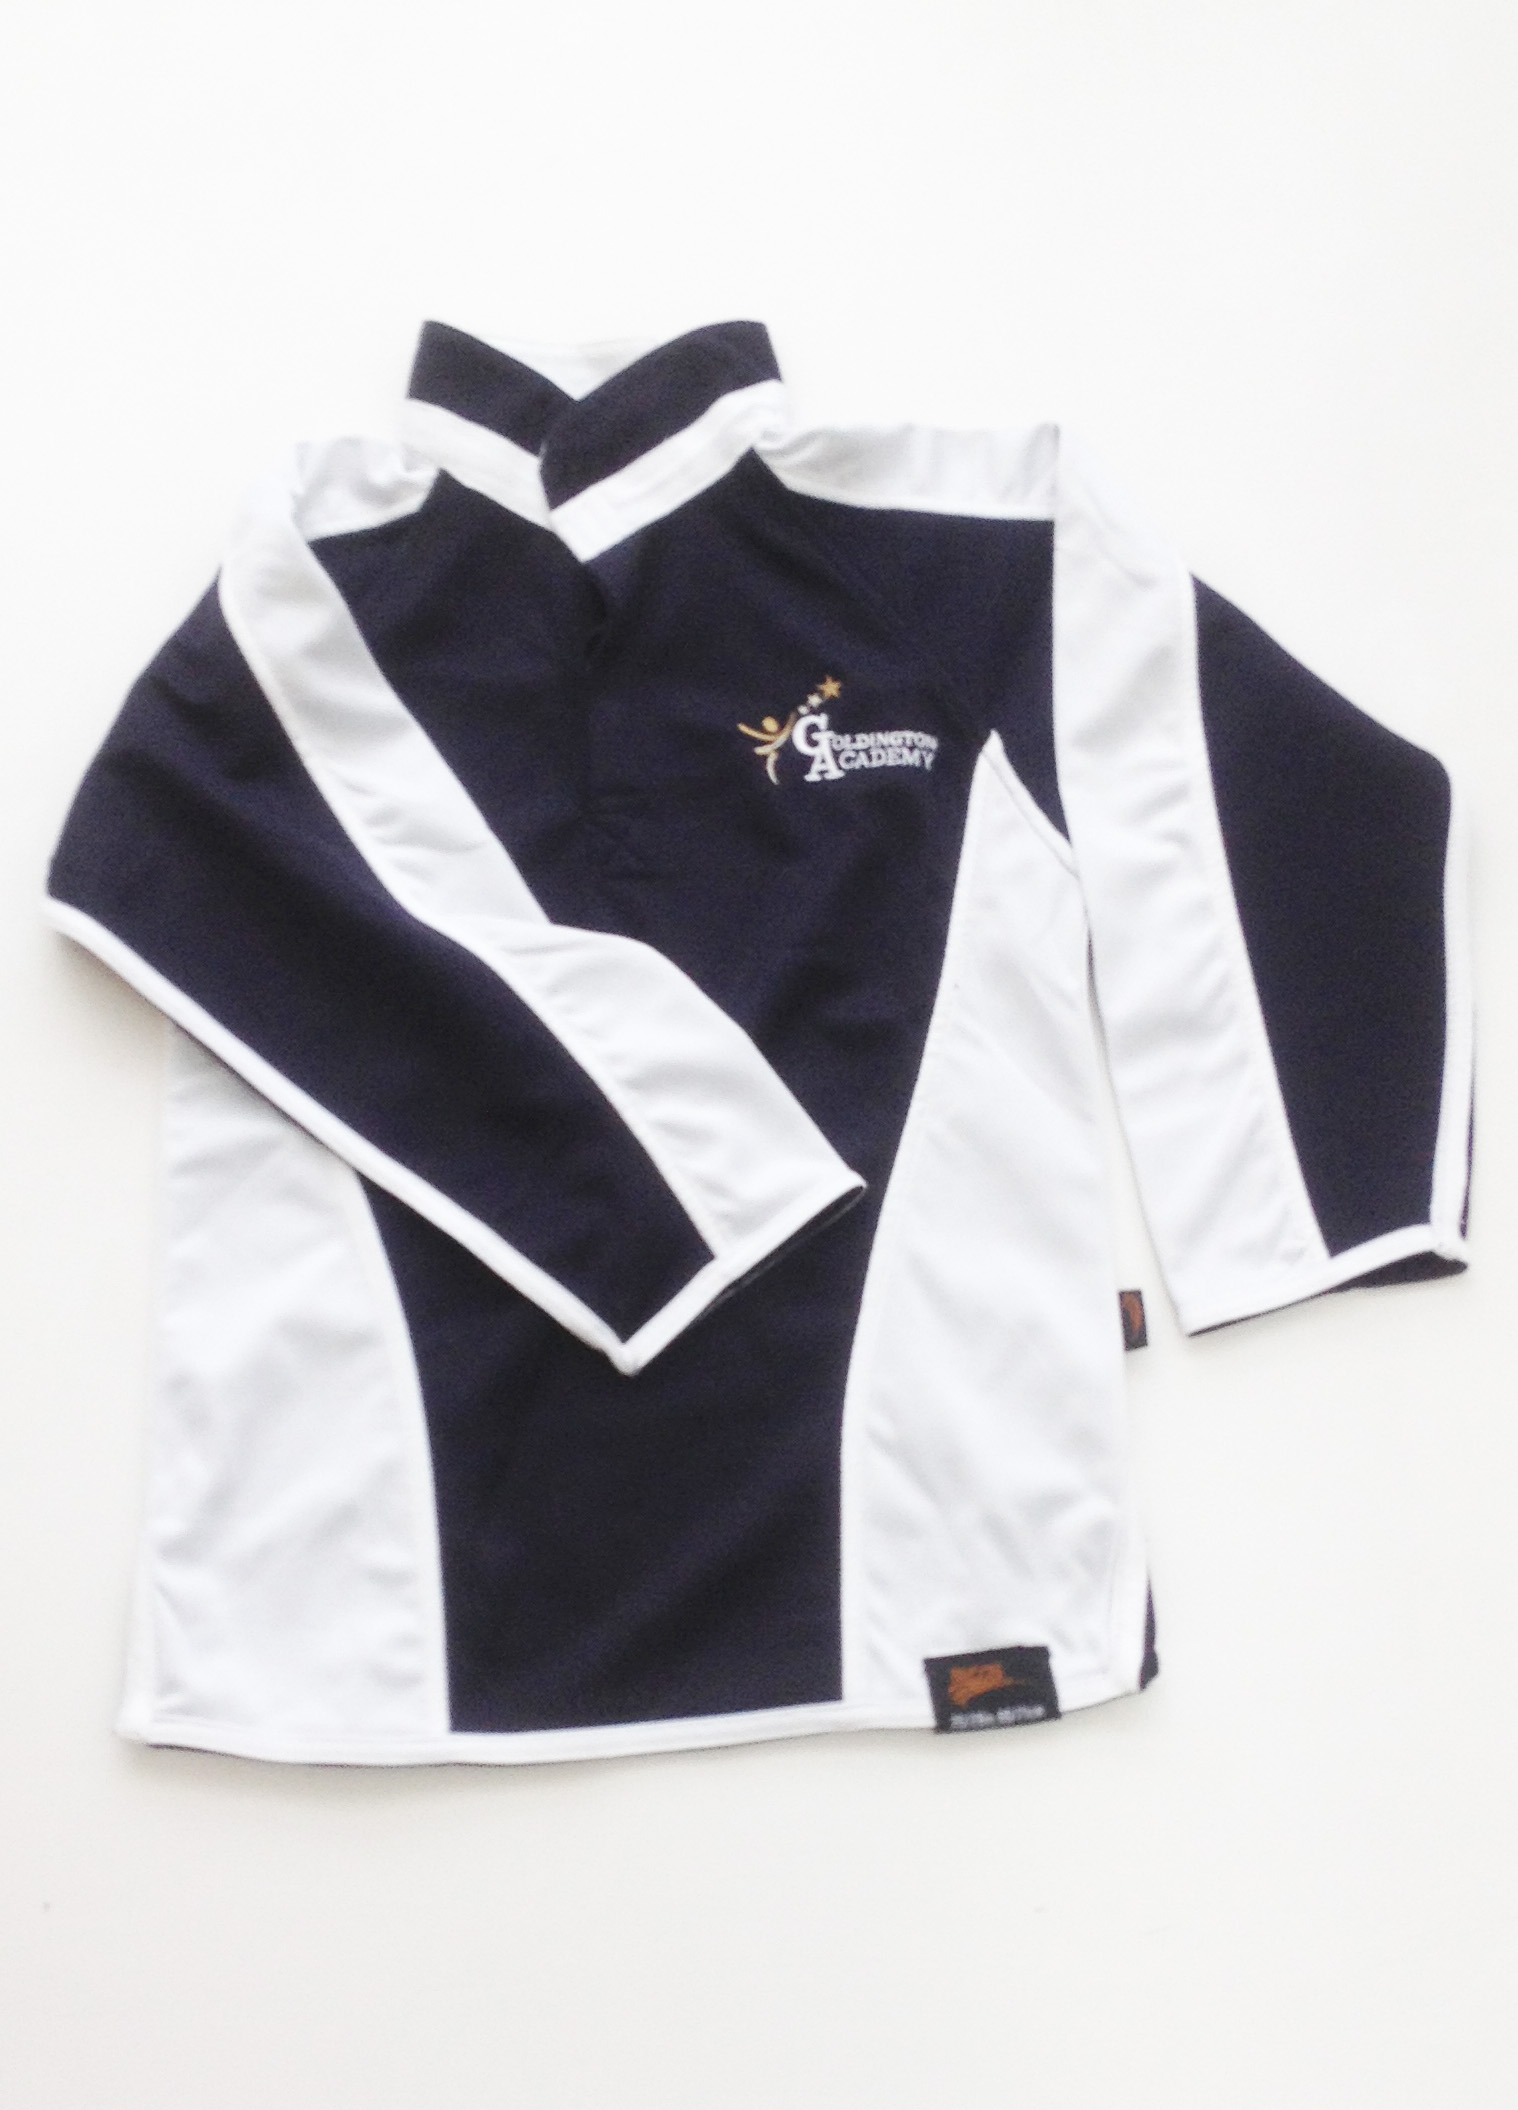 Goldington Academy Rugby Top (Navy/White)